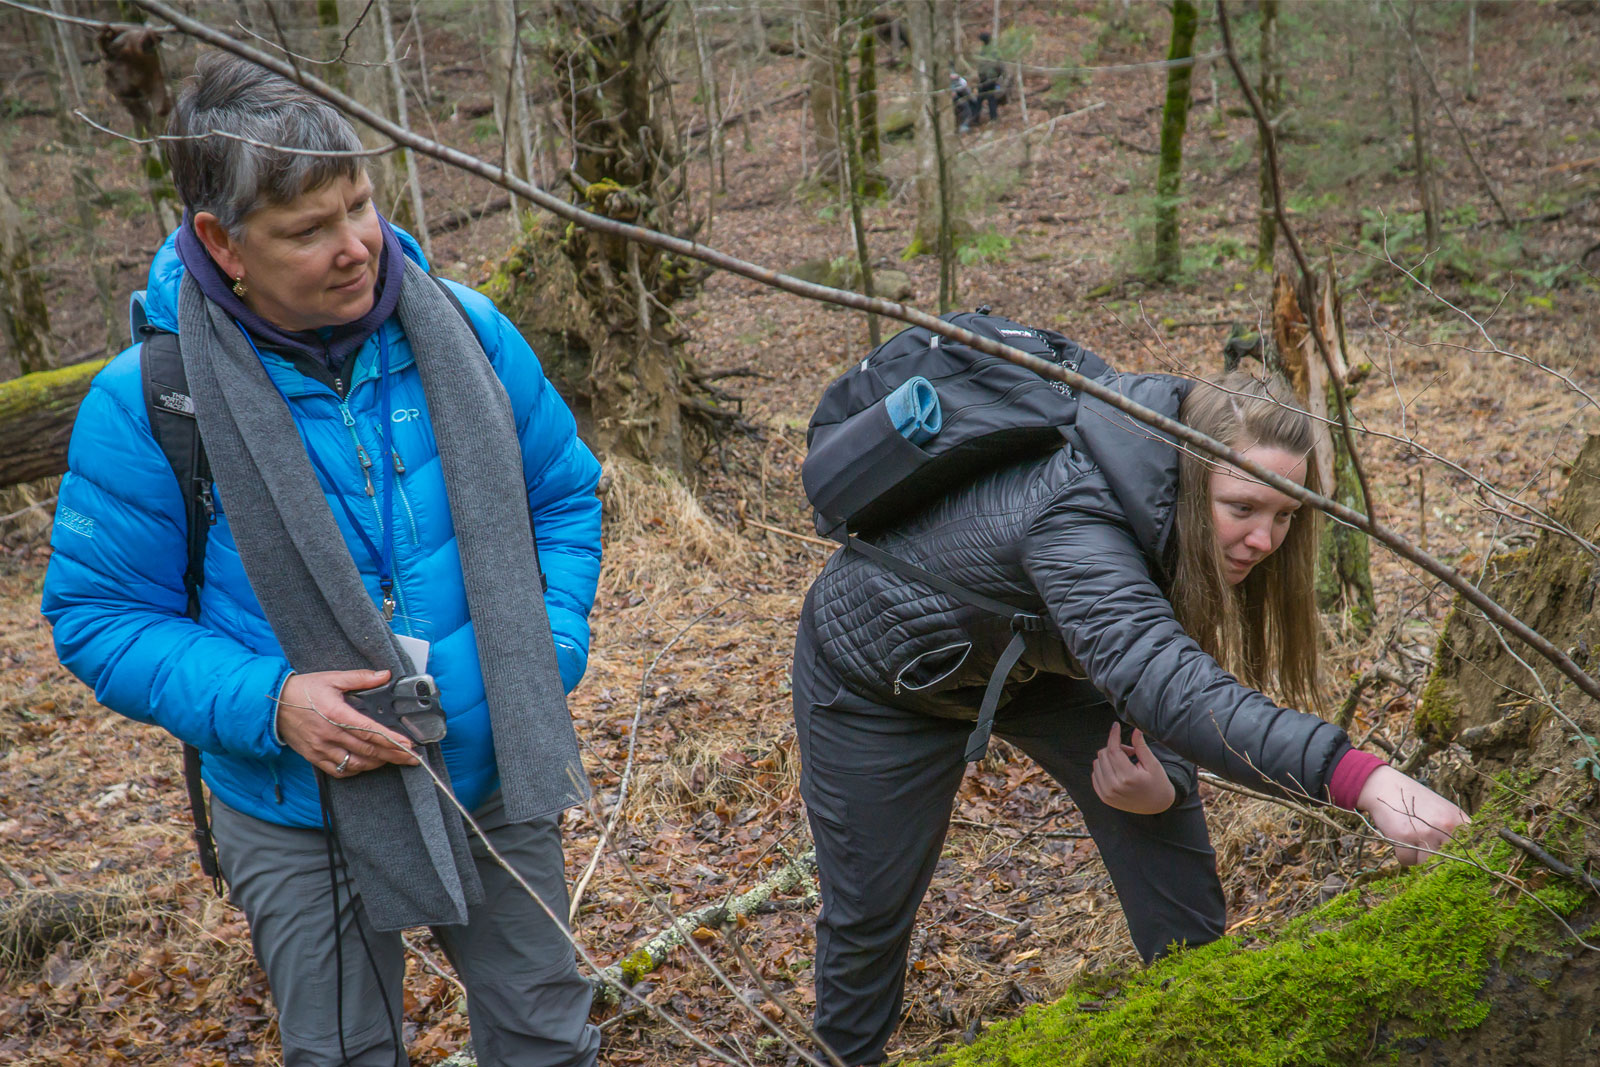 Two students of the naturalist certification program examine moss on a tree